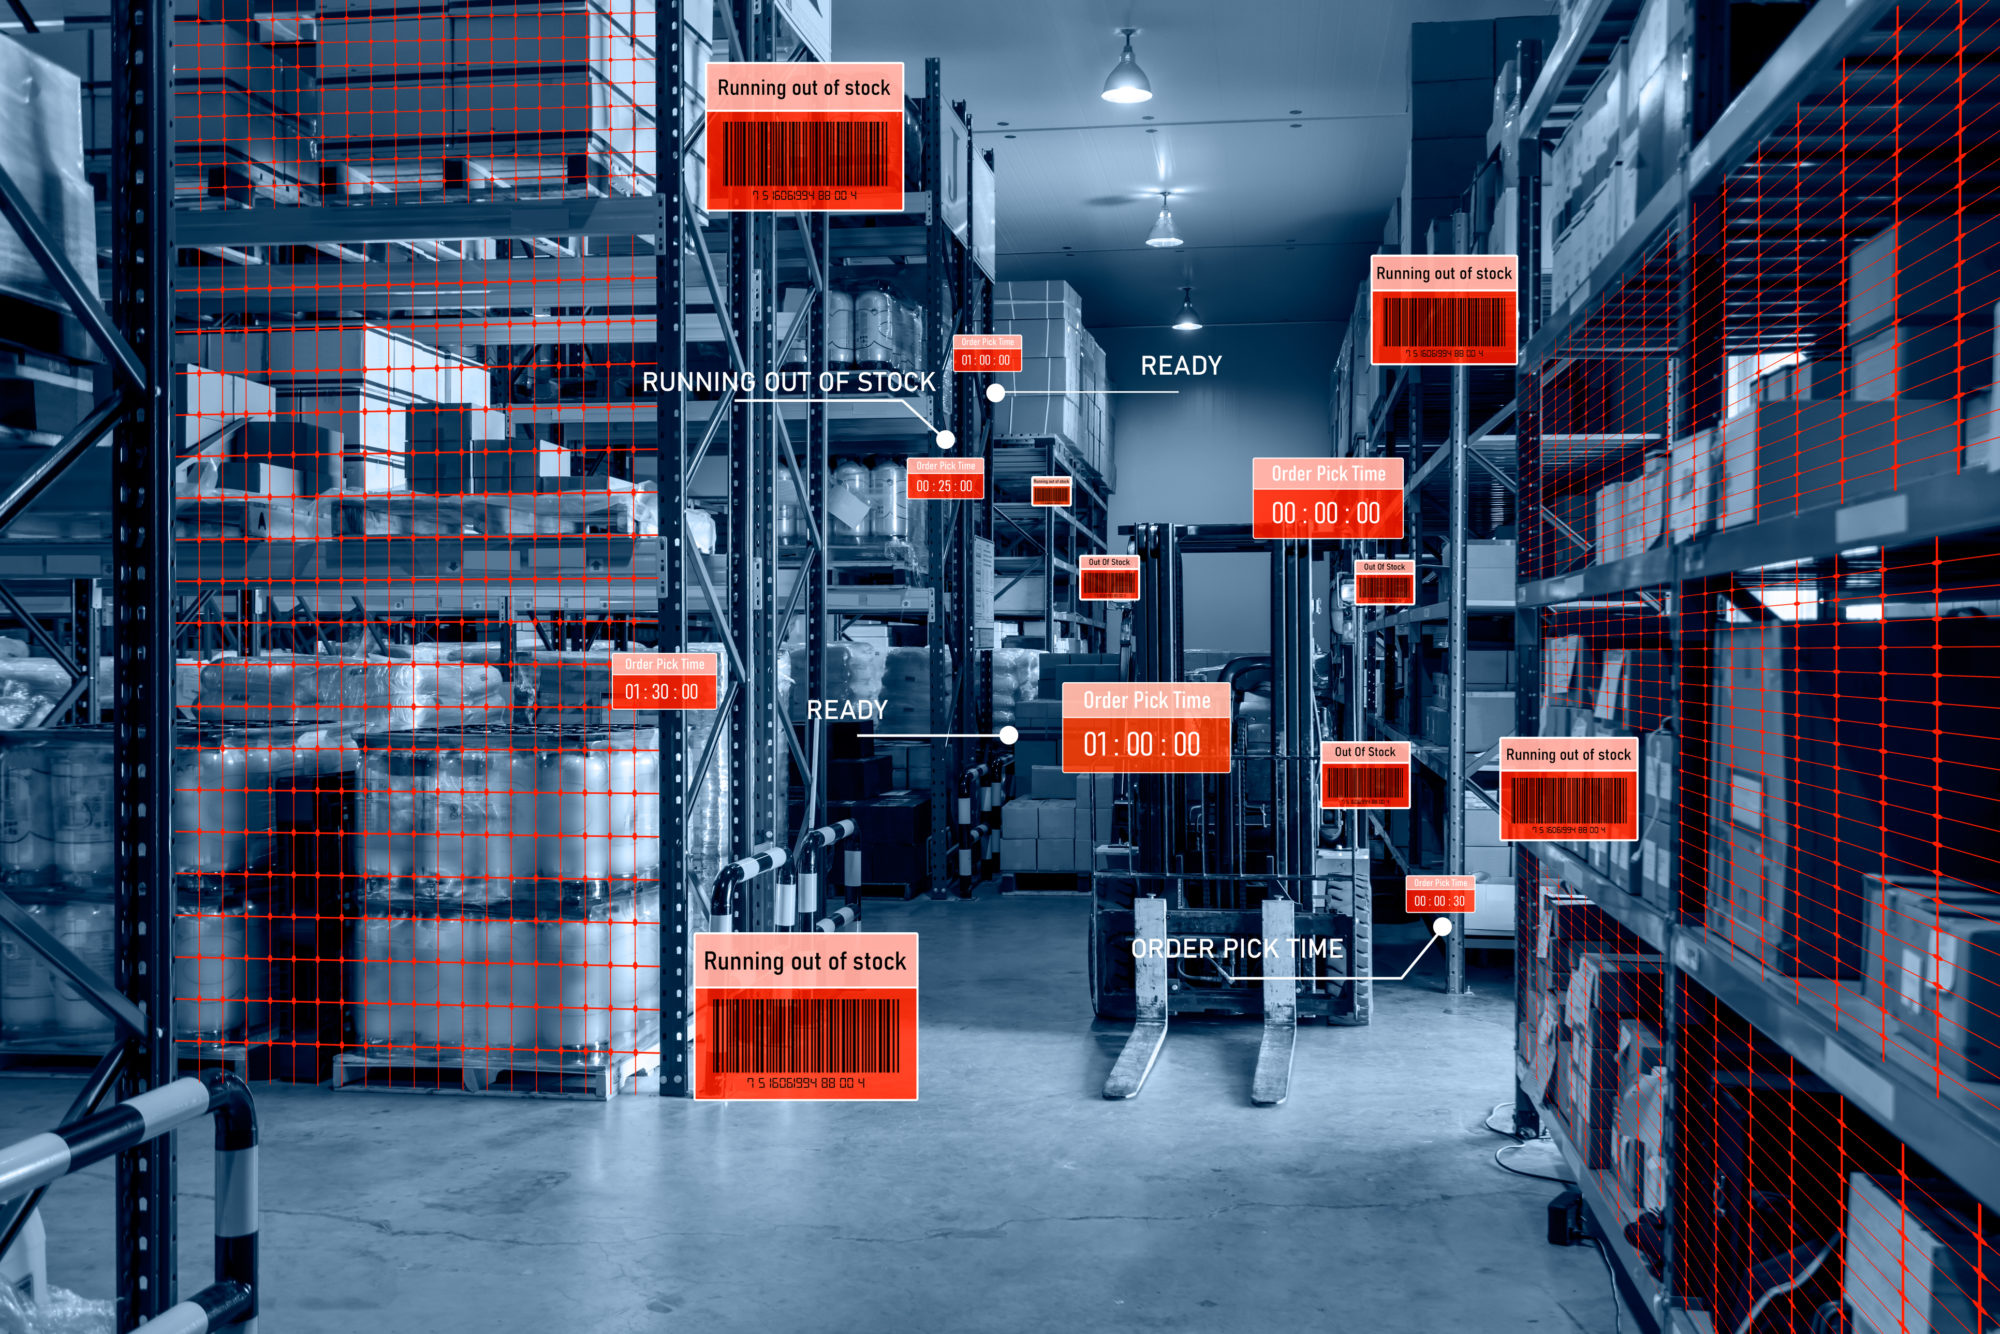 Smart warehouse management system using augmented reality technology to identify package picking and deliver